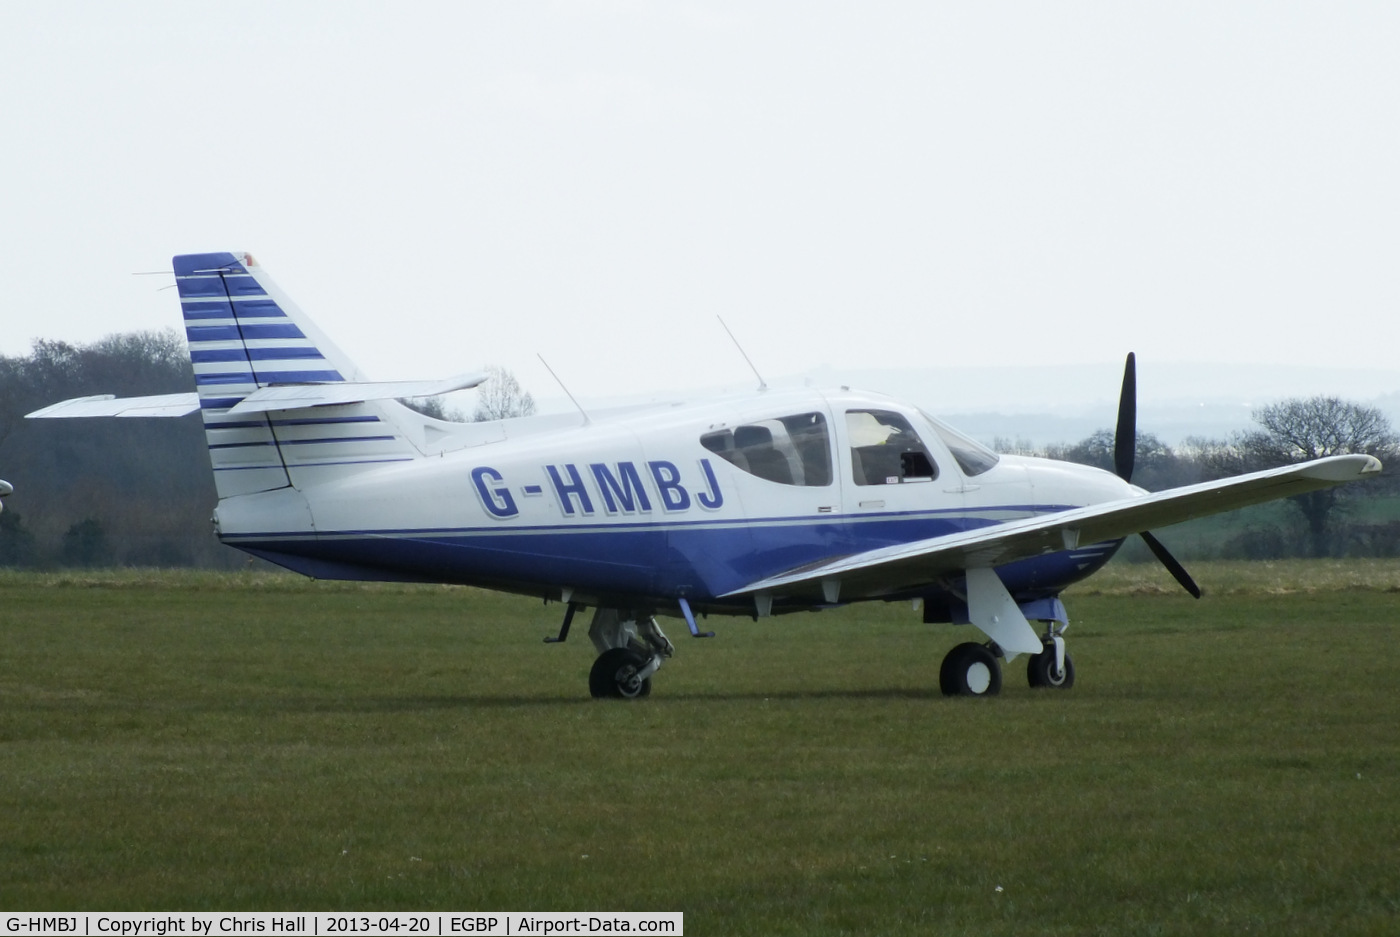 G-HMBJ, 1996 Rockwell Commander 114B C/N 14636, visitor to the Rockwell Commander fly-in at Kemble